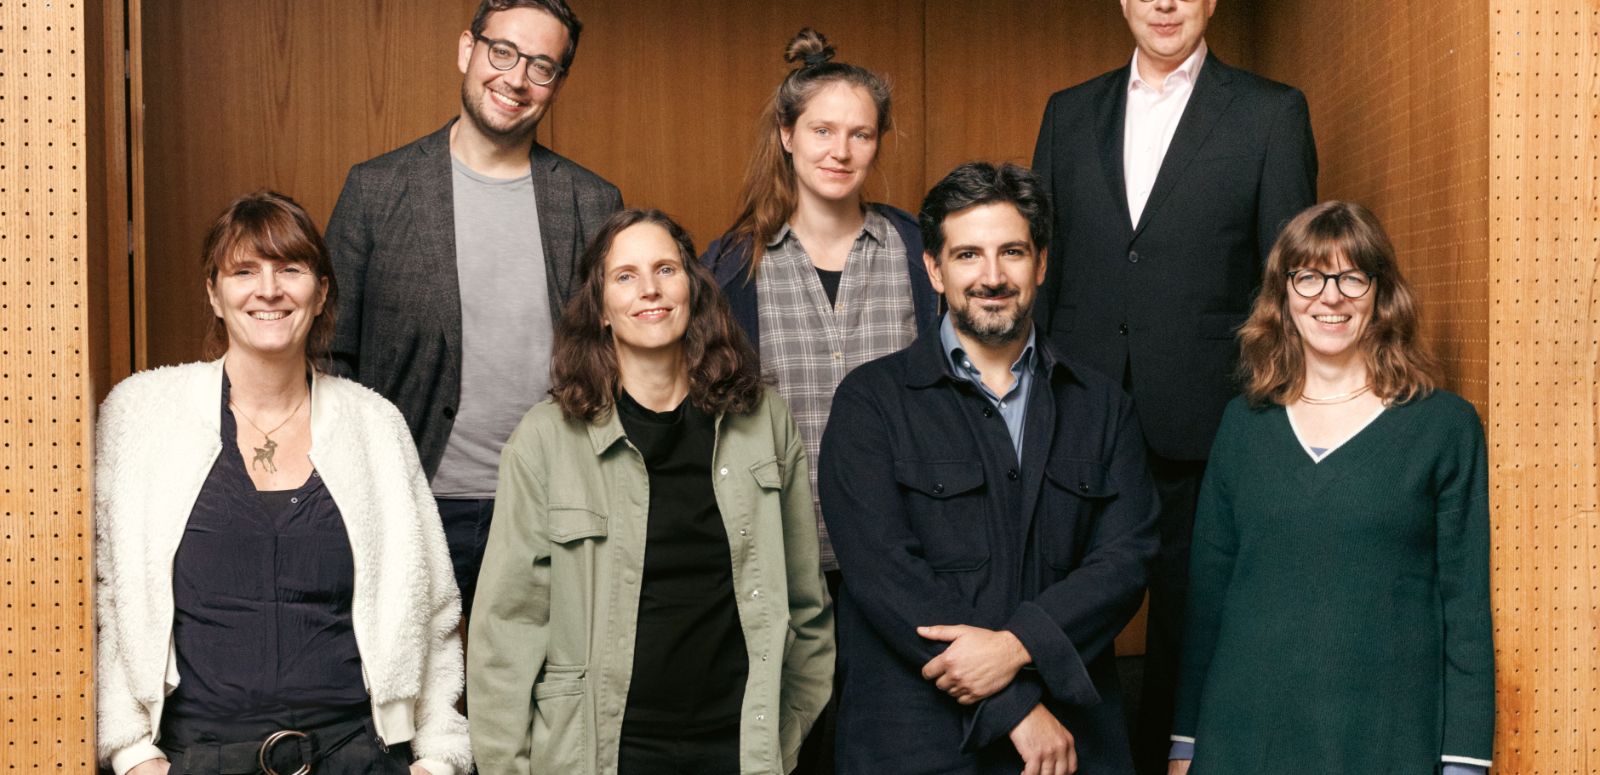 The seven Theatertreffen jury members stand in front of a door of a theatre auditorium and look into the camera.